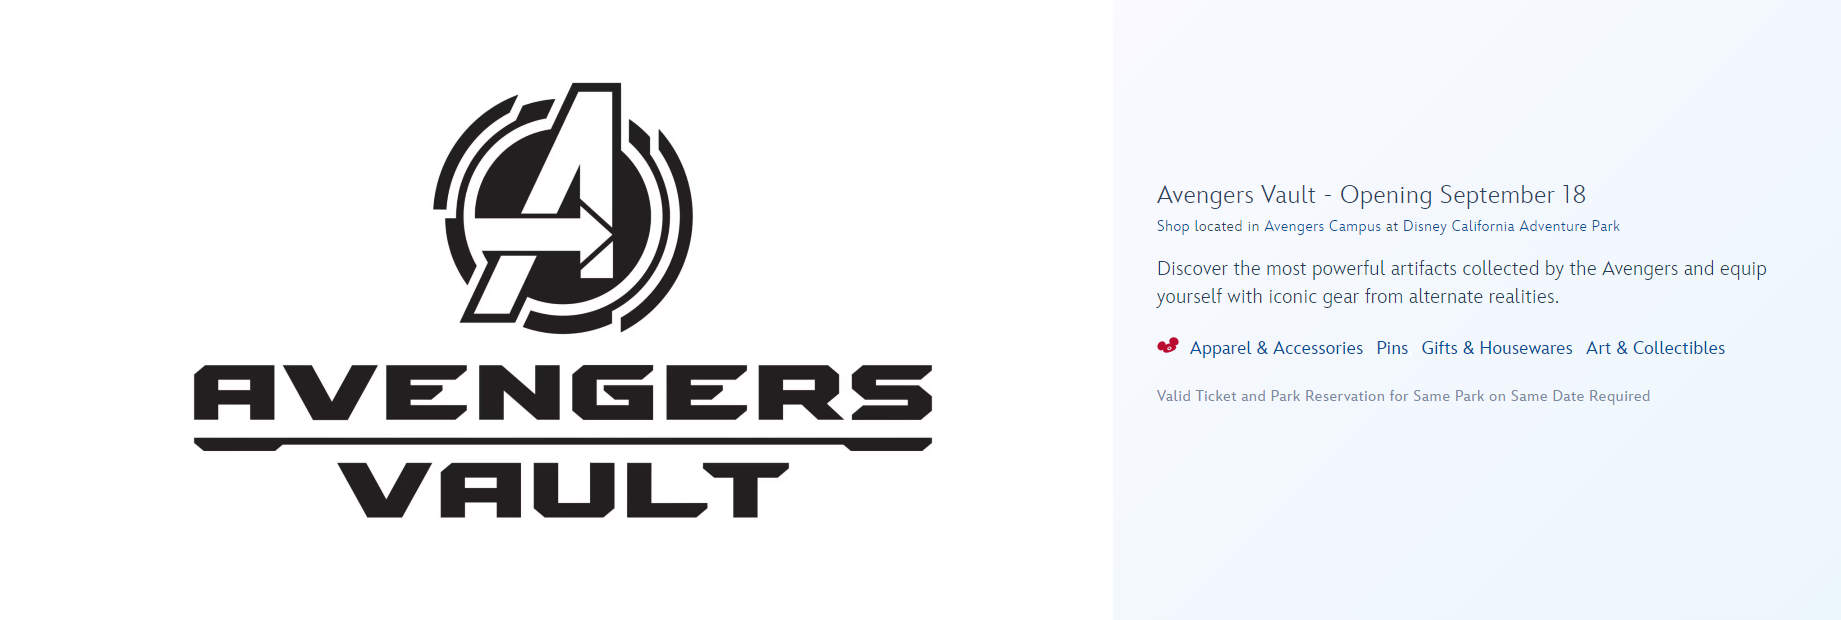 Avengers Vault logo and information--including the store's opening date of September 18th